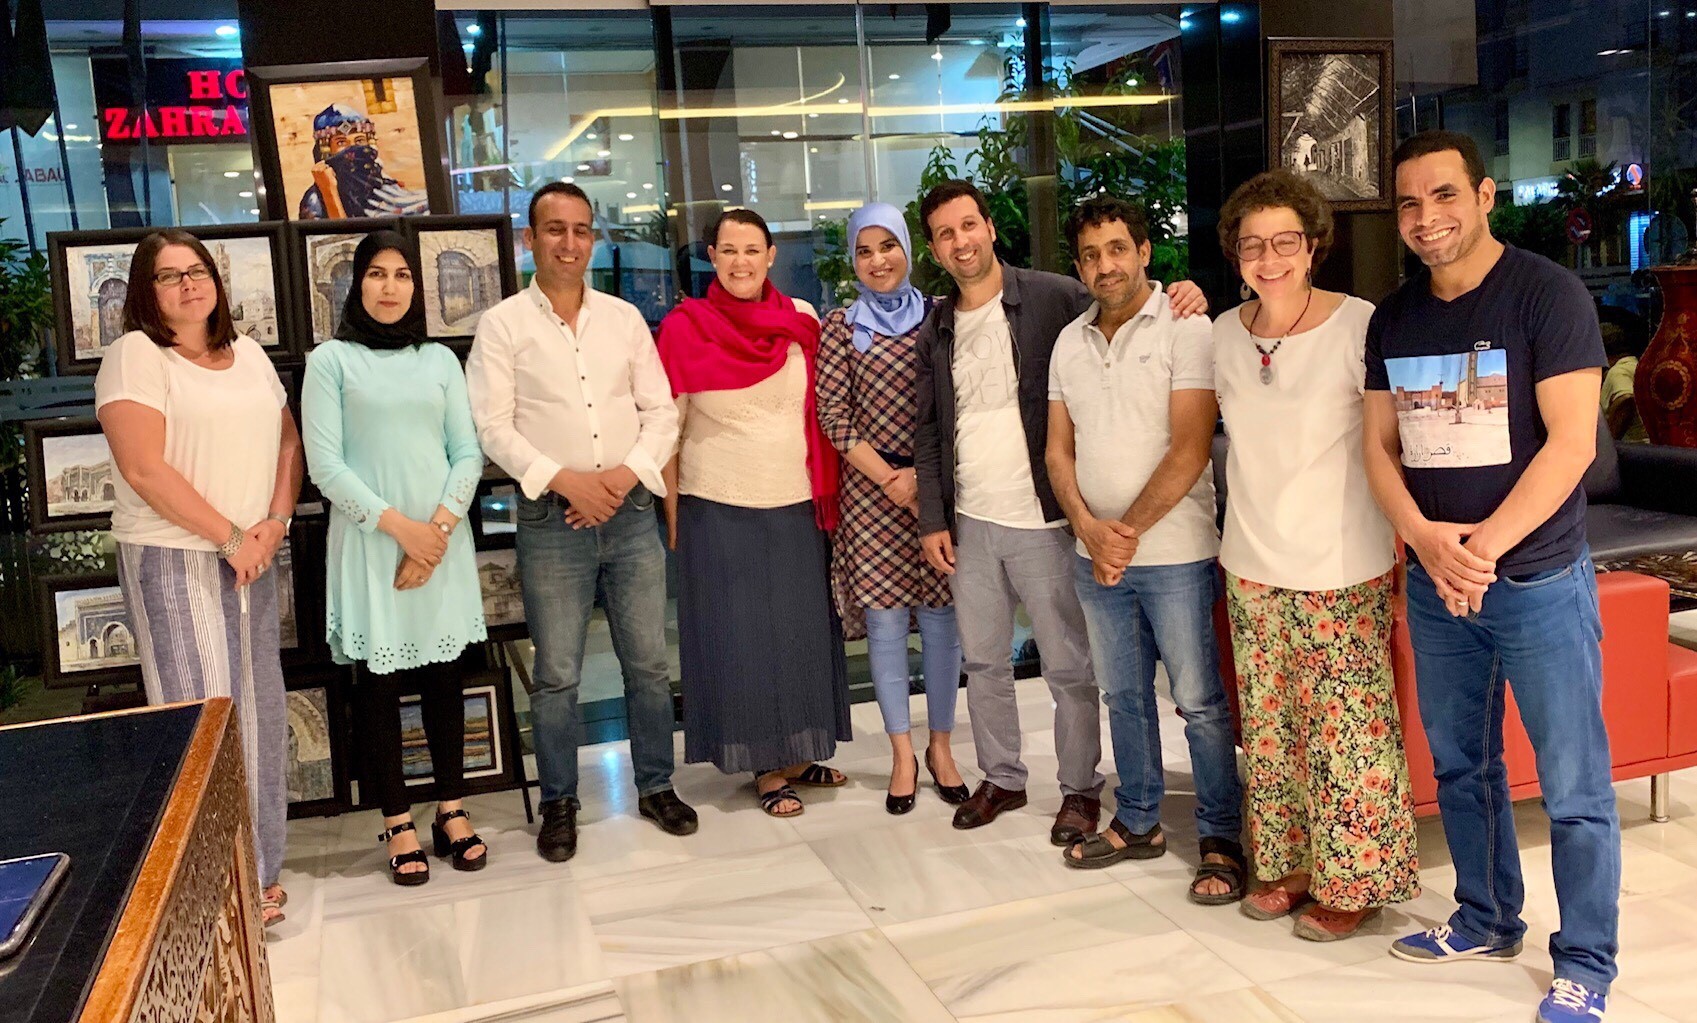 Dr. Oliphant meeting with the President of the Moroccan Social Work Association, Mr. Mohammed Elardi, and representatives from the emerging profession of social work and social work education